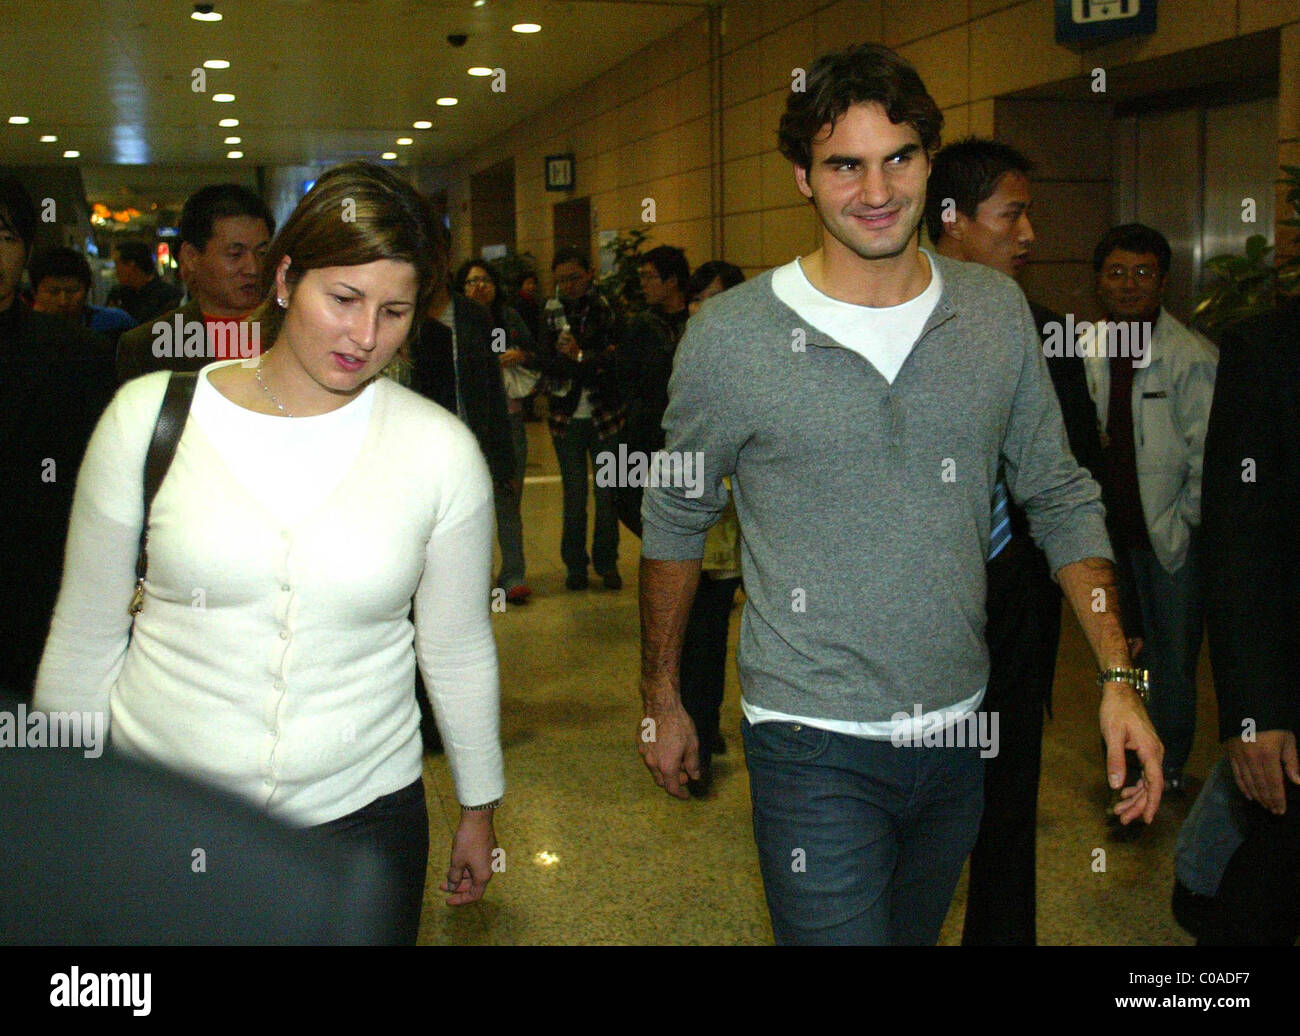 Tennis ace Roger Federer and his girlfriend and agent Mirka Vavrinec arrive at Shanghai International Airport for the Masters Stock Photo